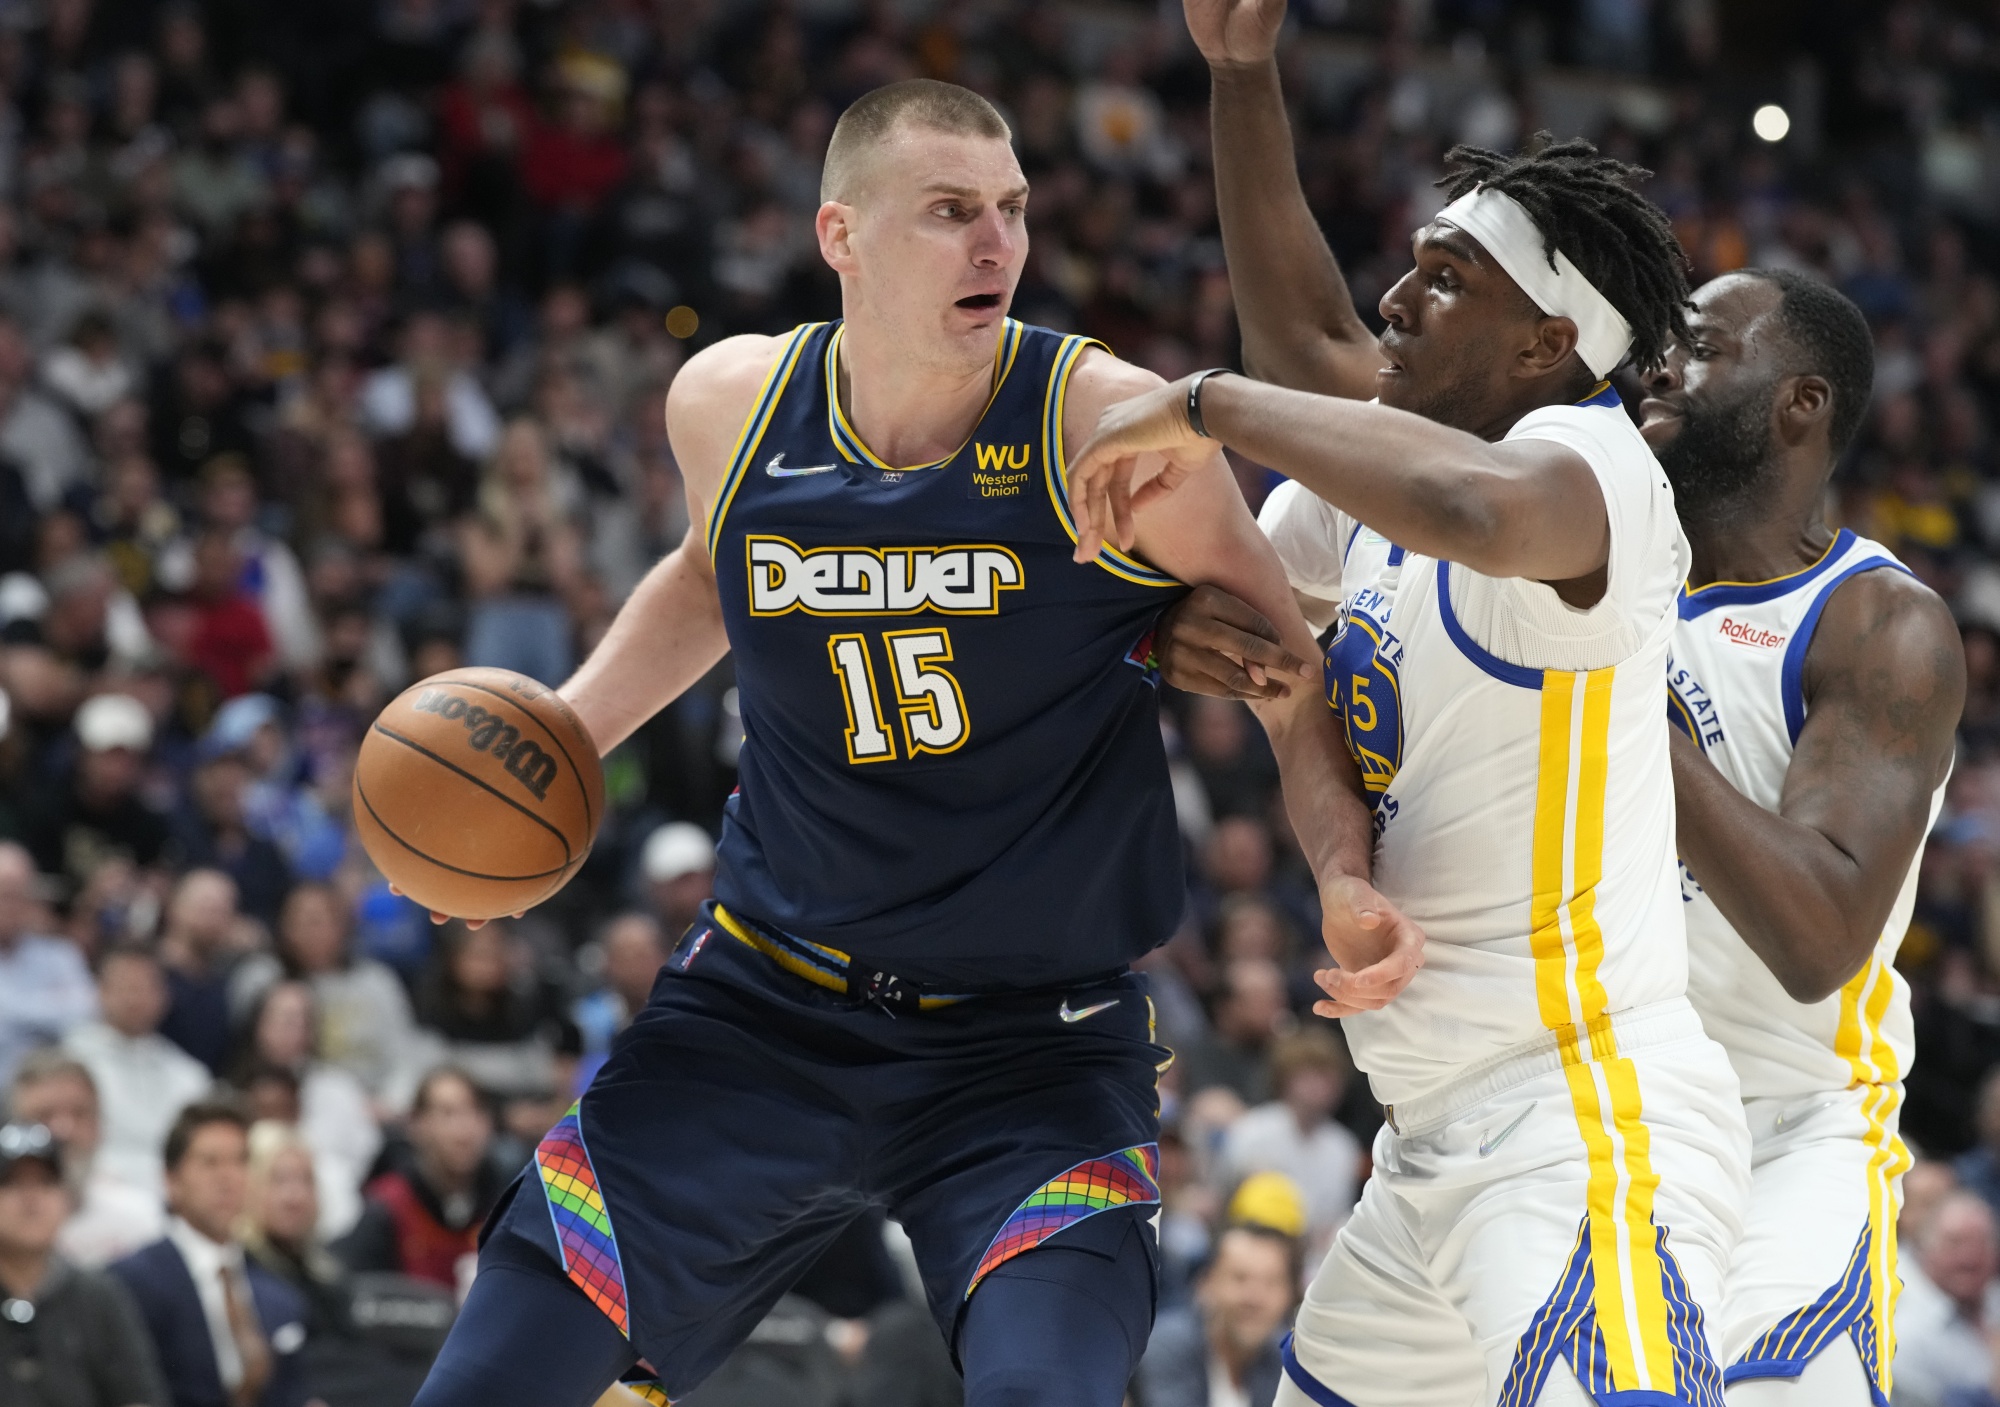 With new deal, Jokic sets aim at leading Nuggets to playoffs